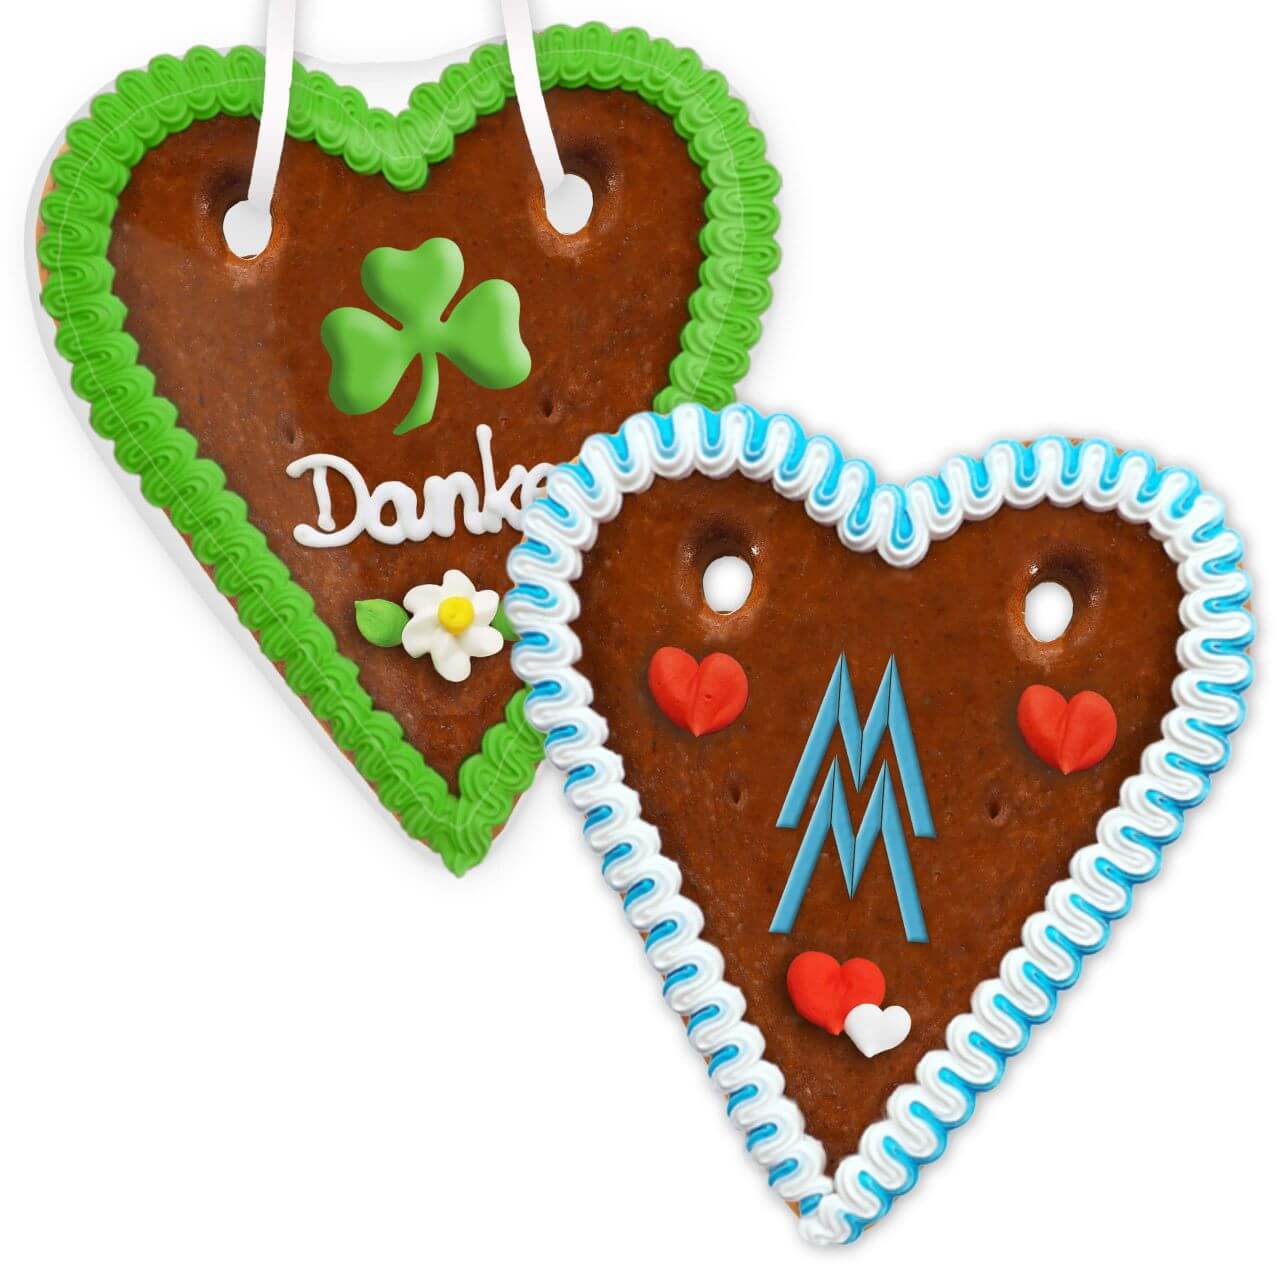 Gingerbread Heart 18cm - With printed frosting logo